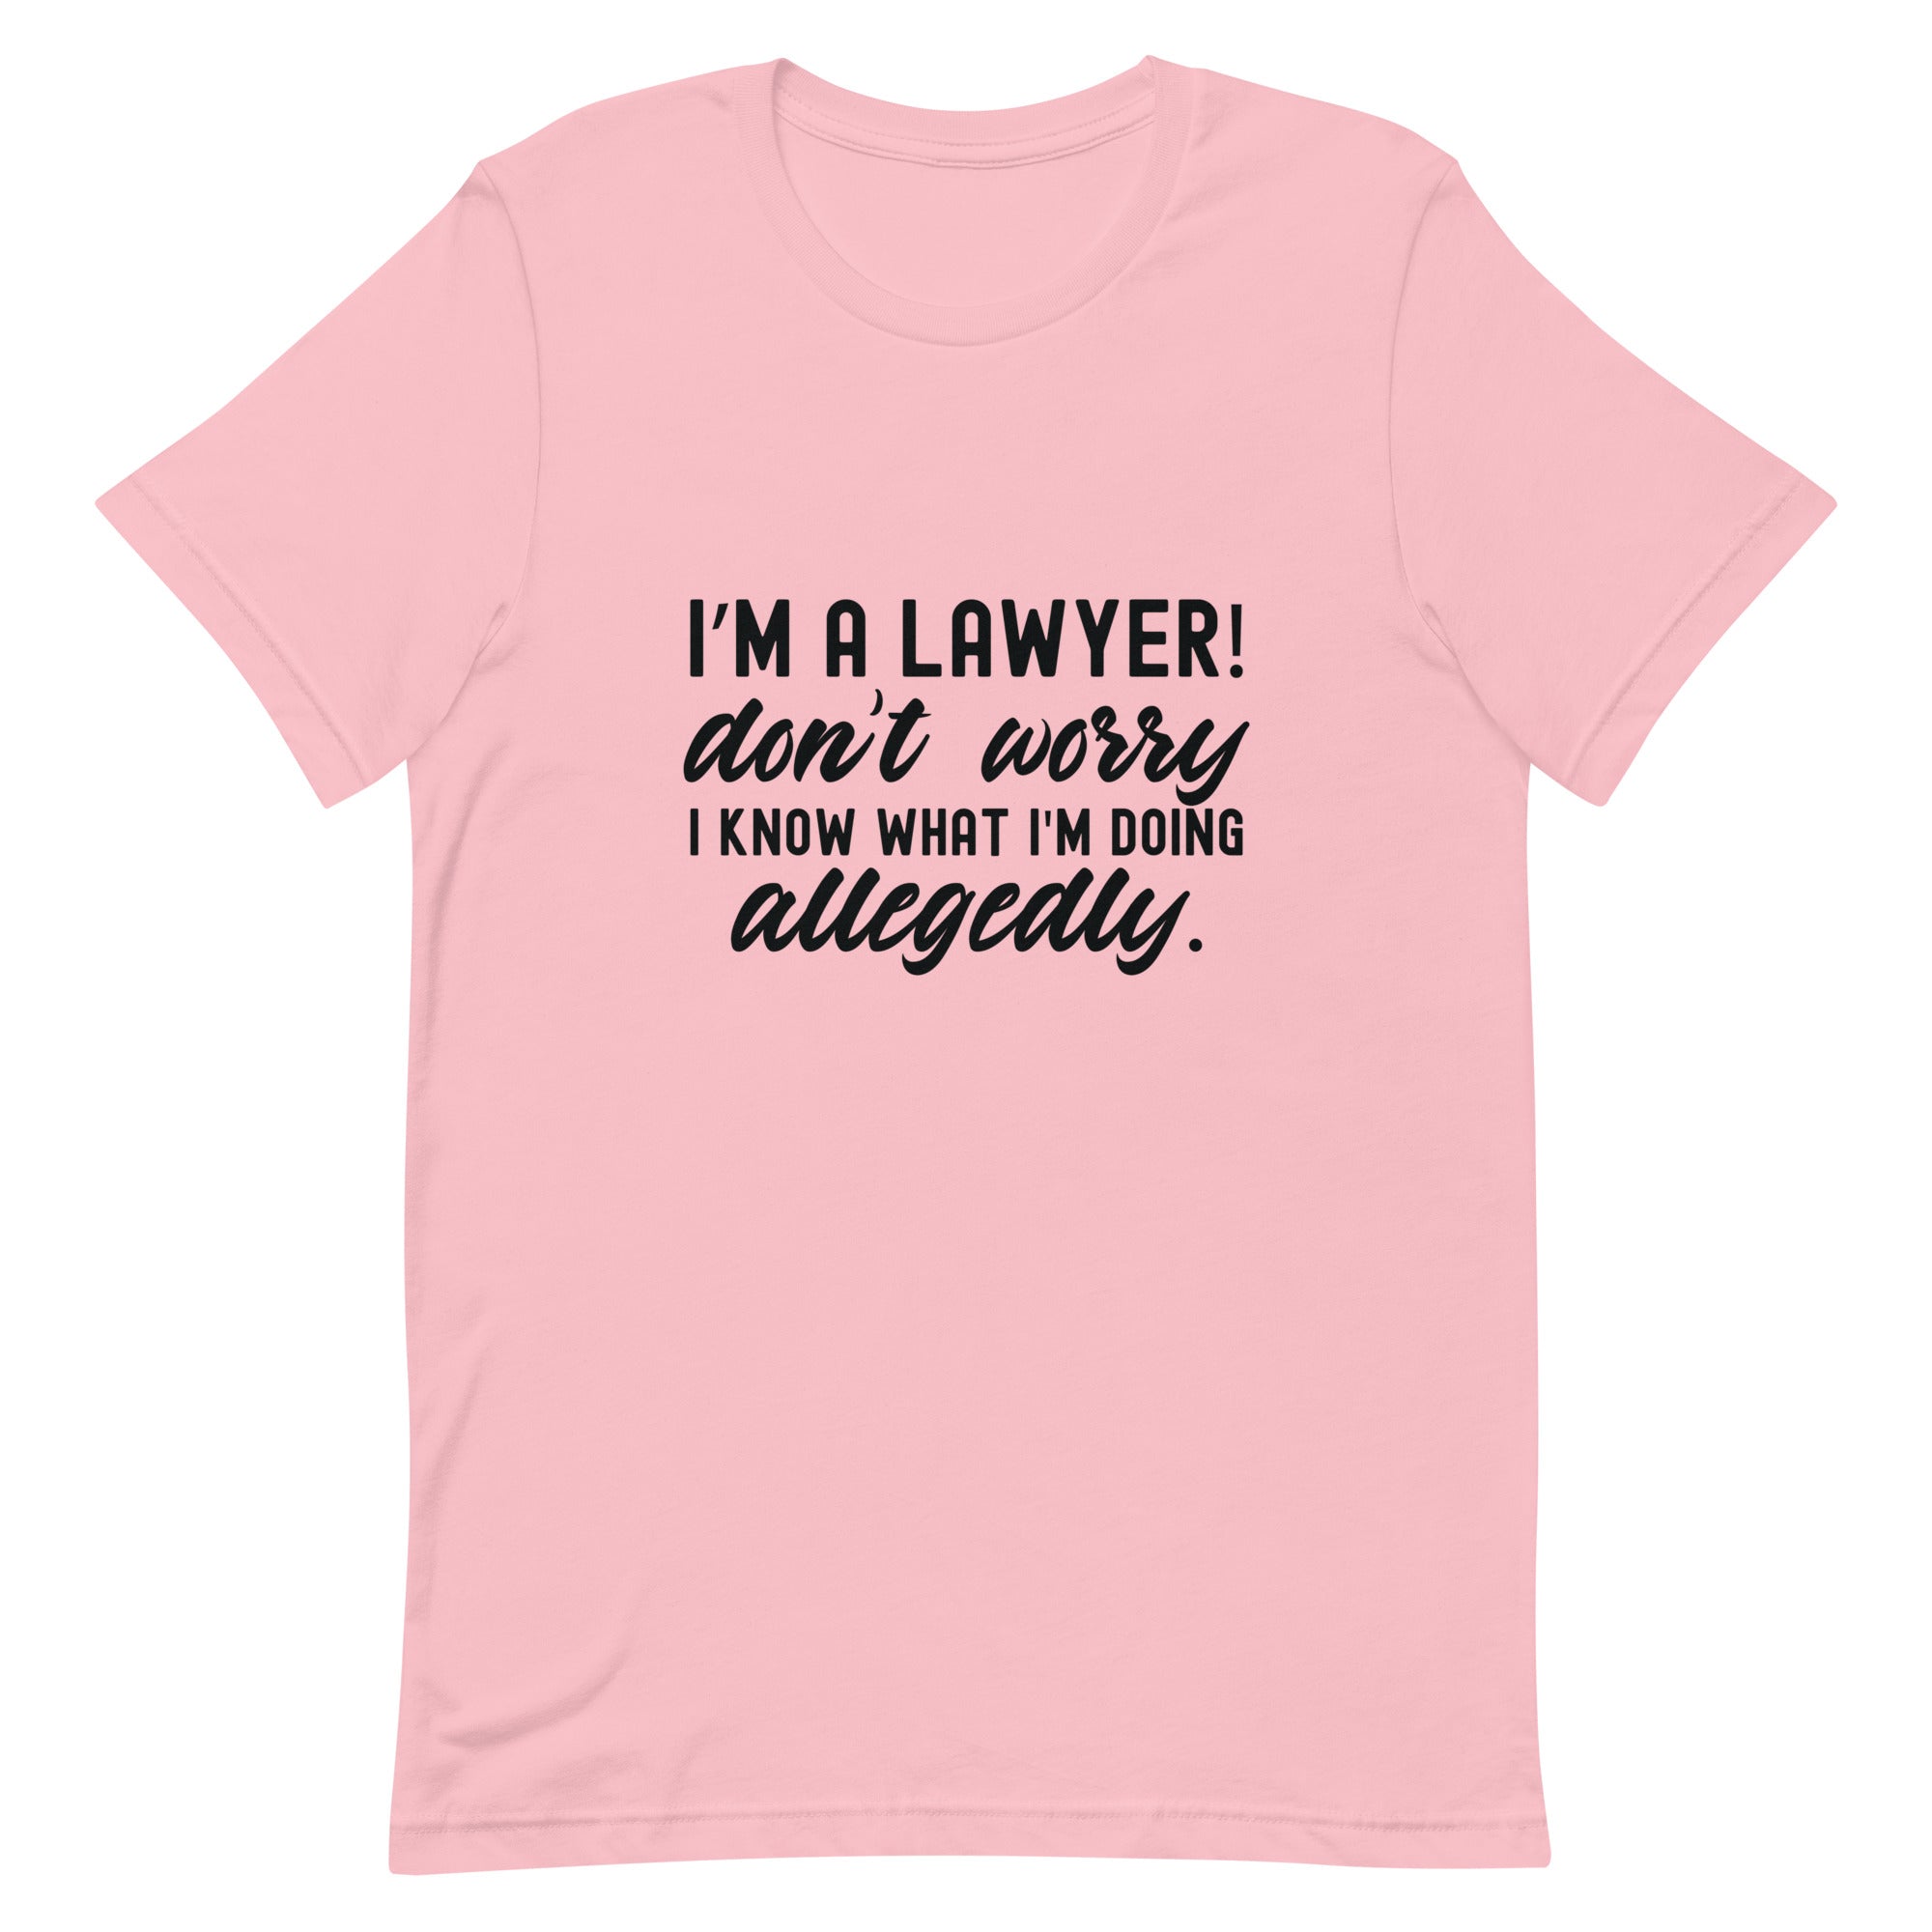 Unisex t-shirt |  I’m a lawyer don’t worry I know what I'm doing (allegedly)